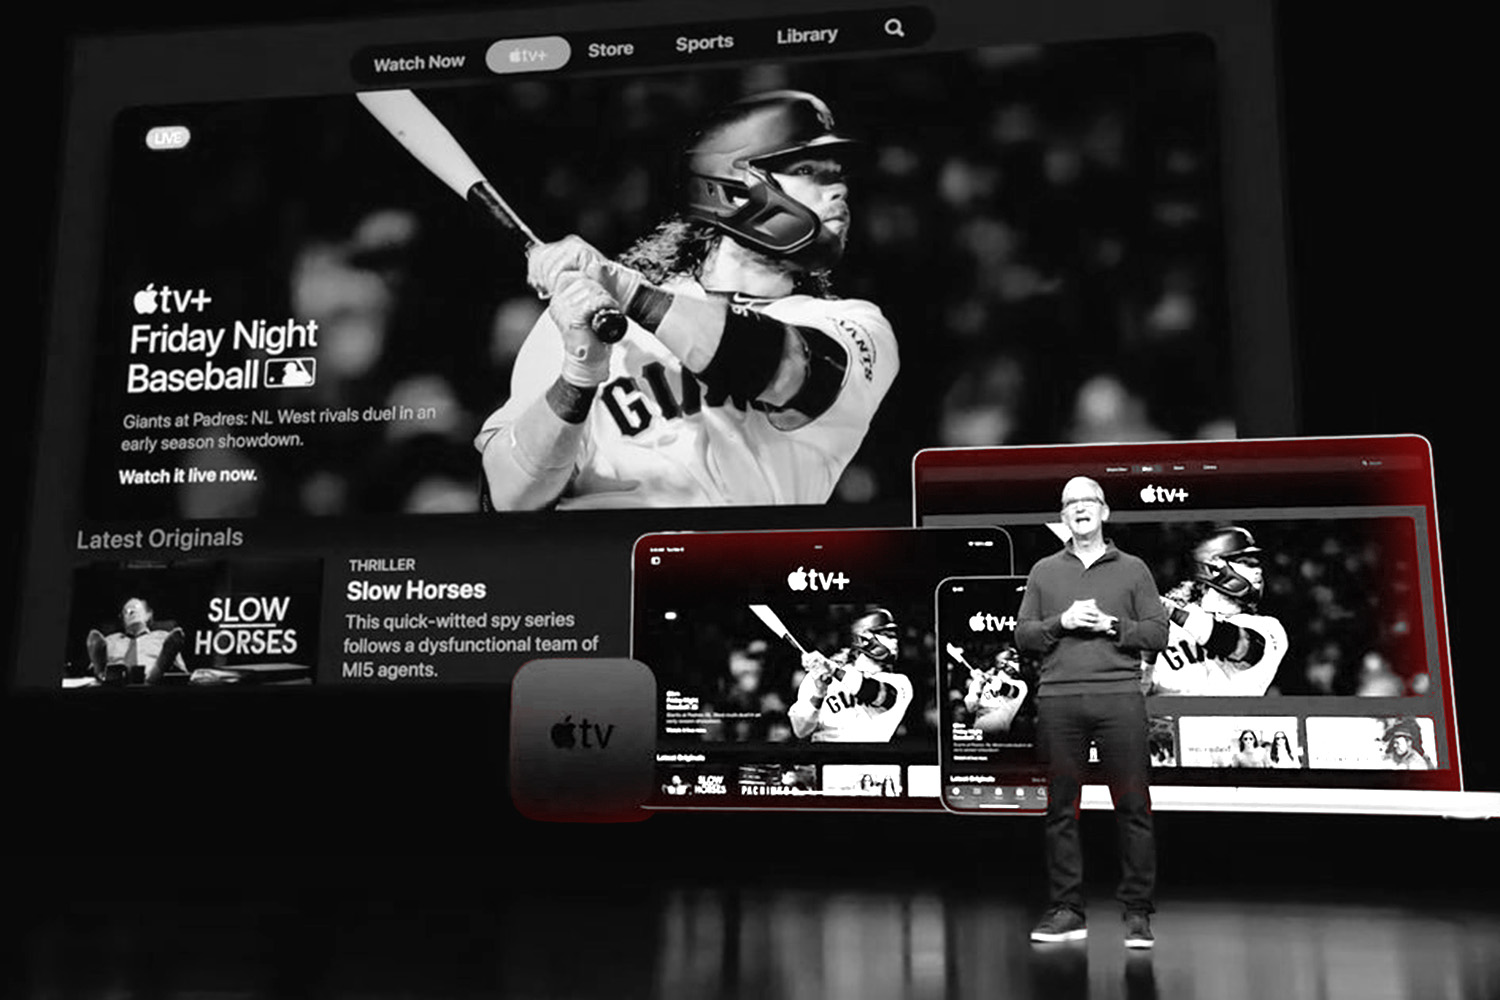 Apple Secures Rights to MLB Games